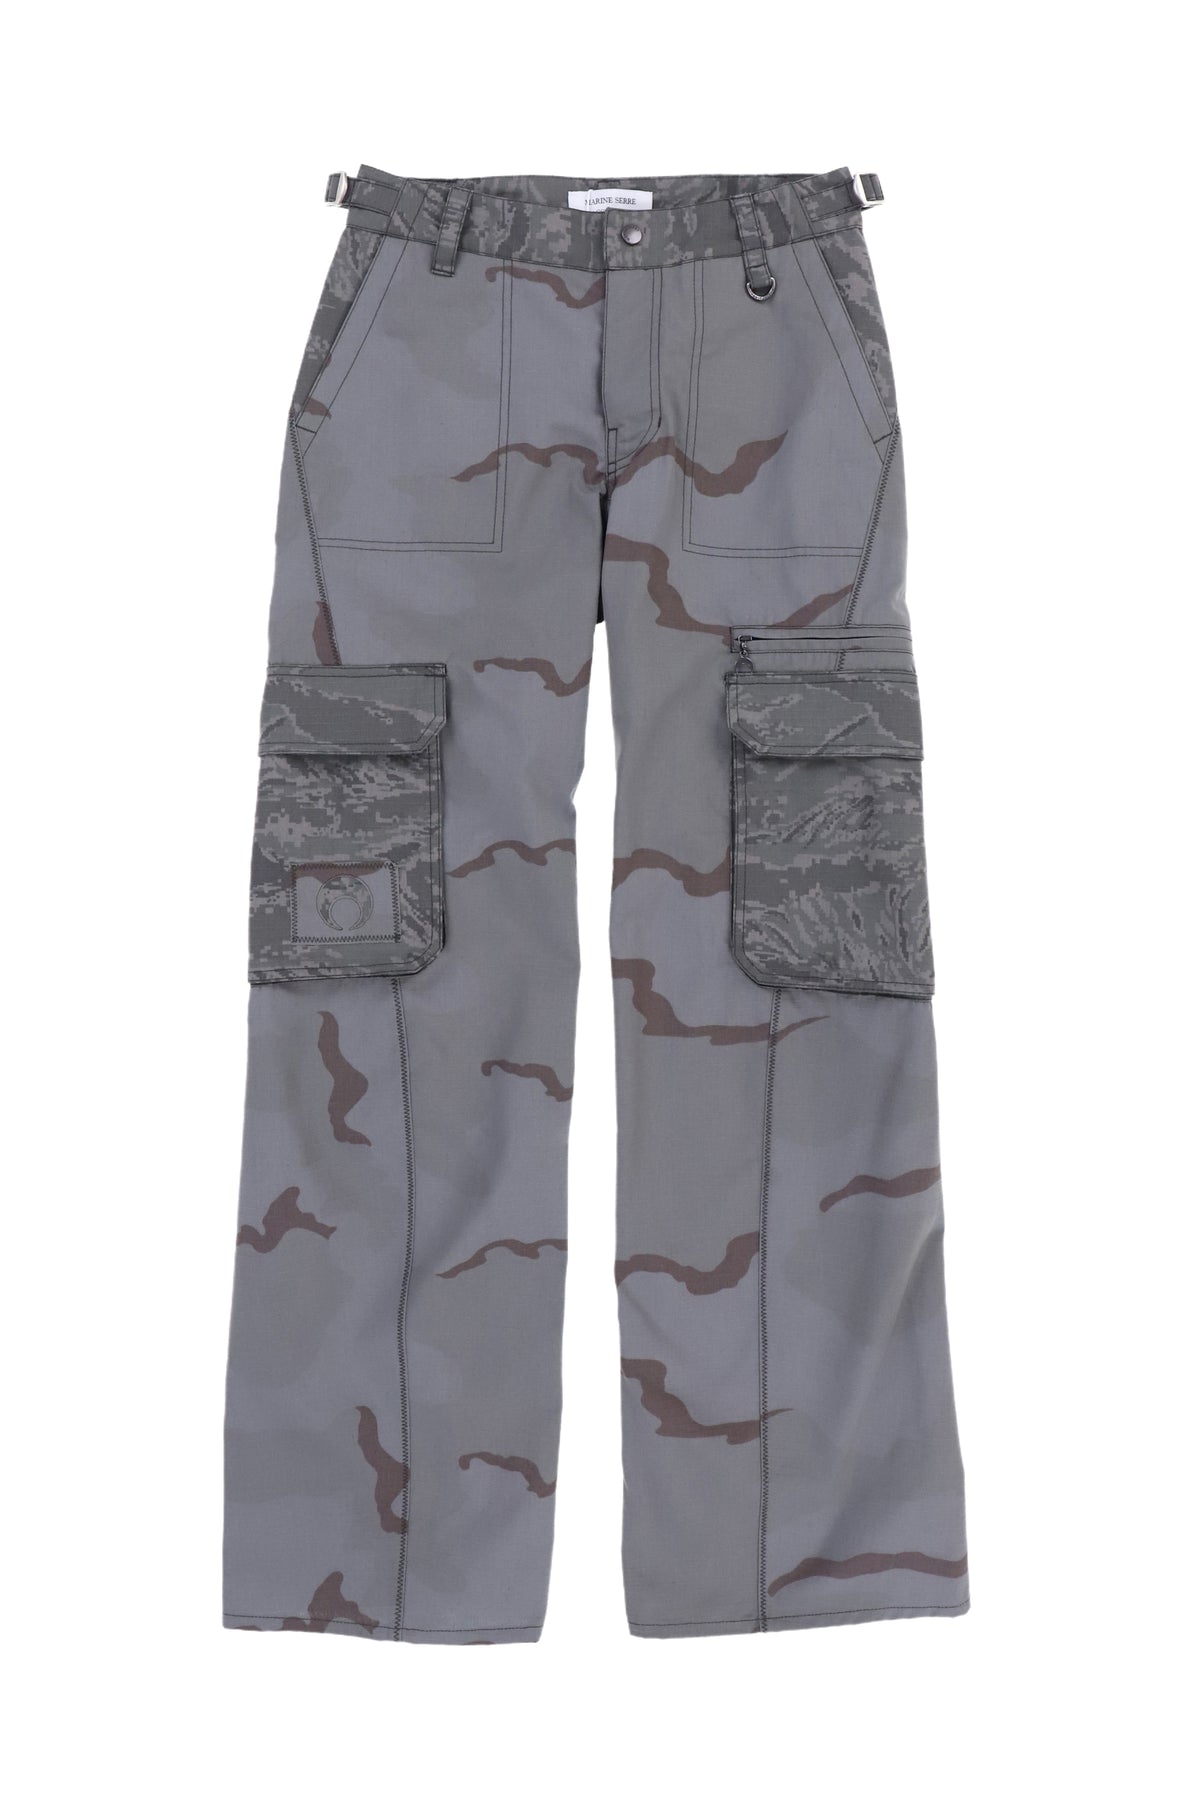 REGENERATED CAMO CARGO PANTS / GR90 DGRY